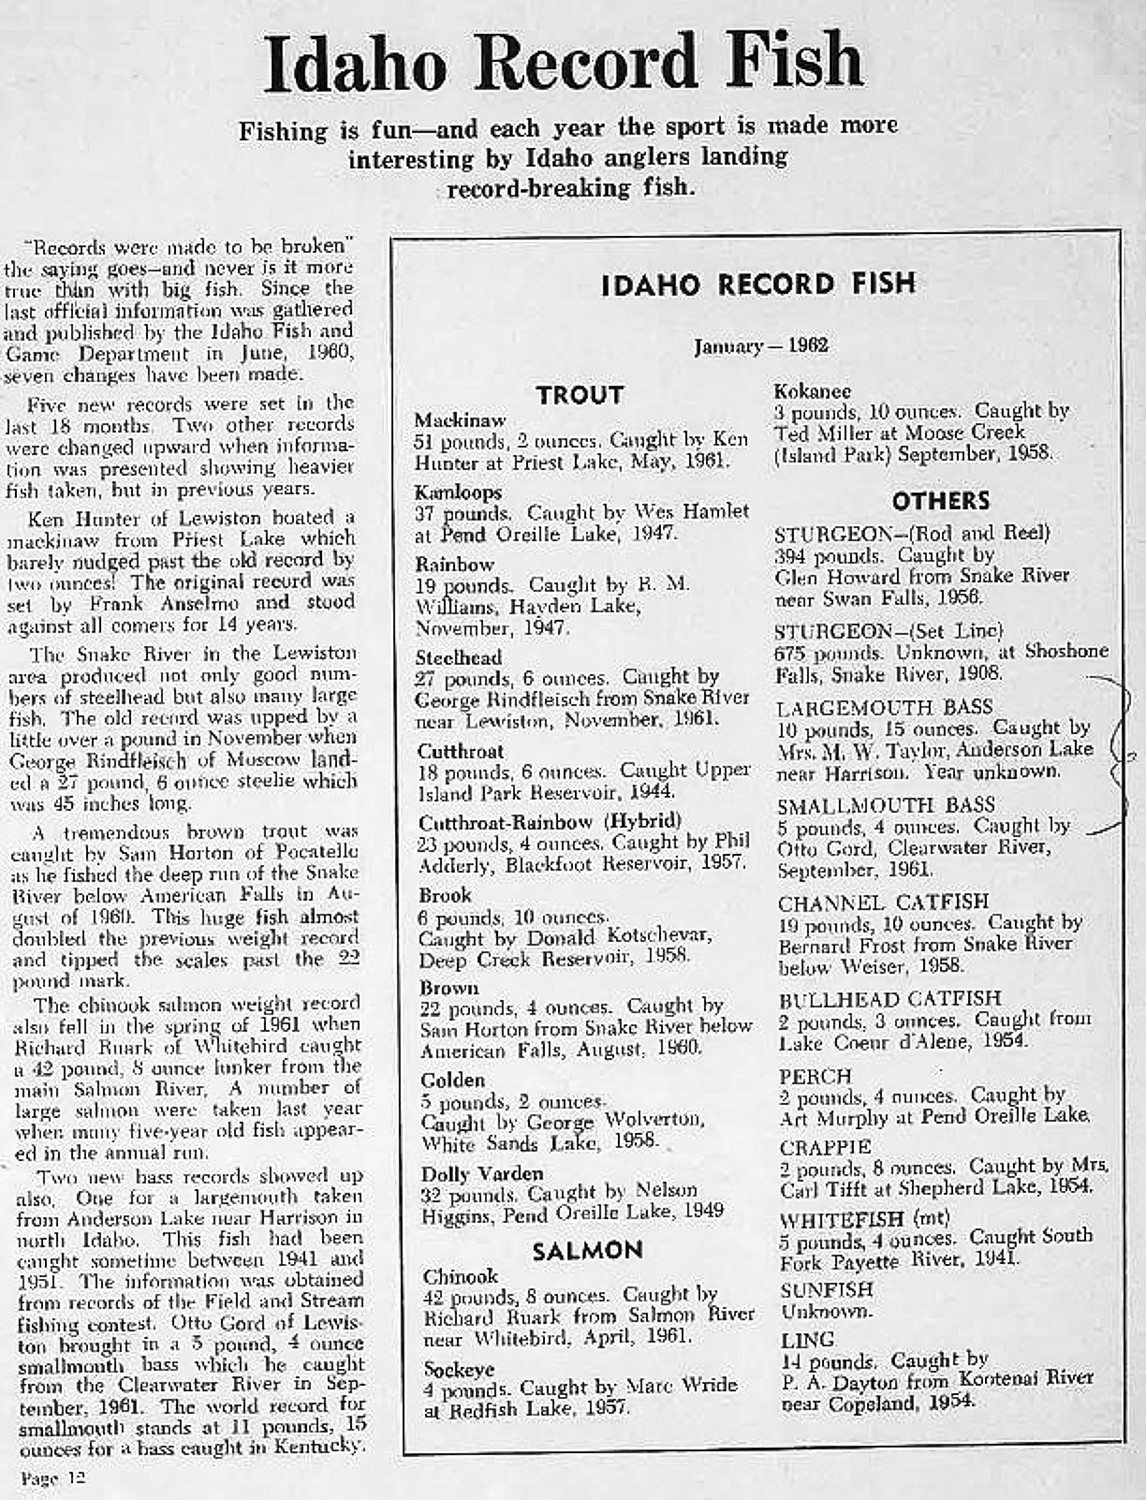 The 1962 Idaho Wildlife review record for the record holding fish.